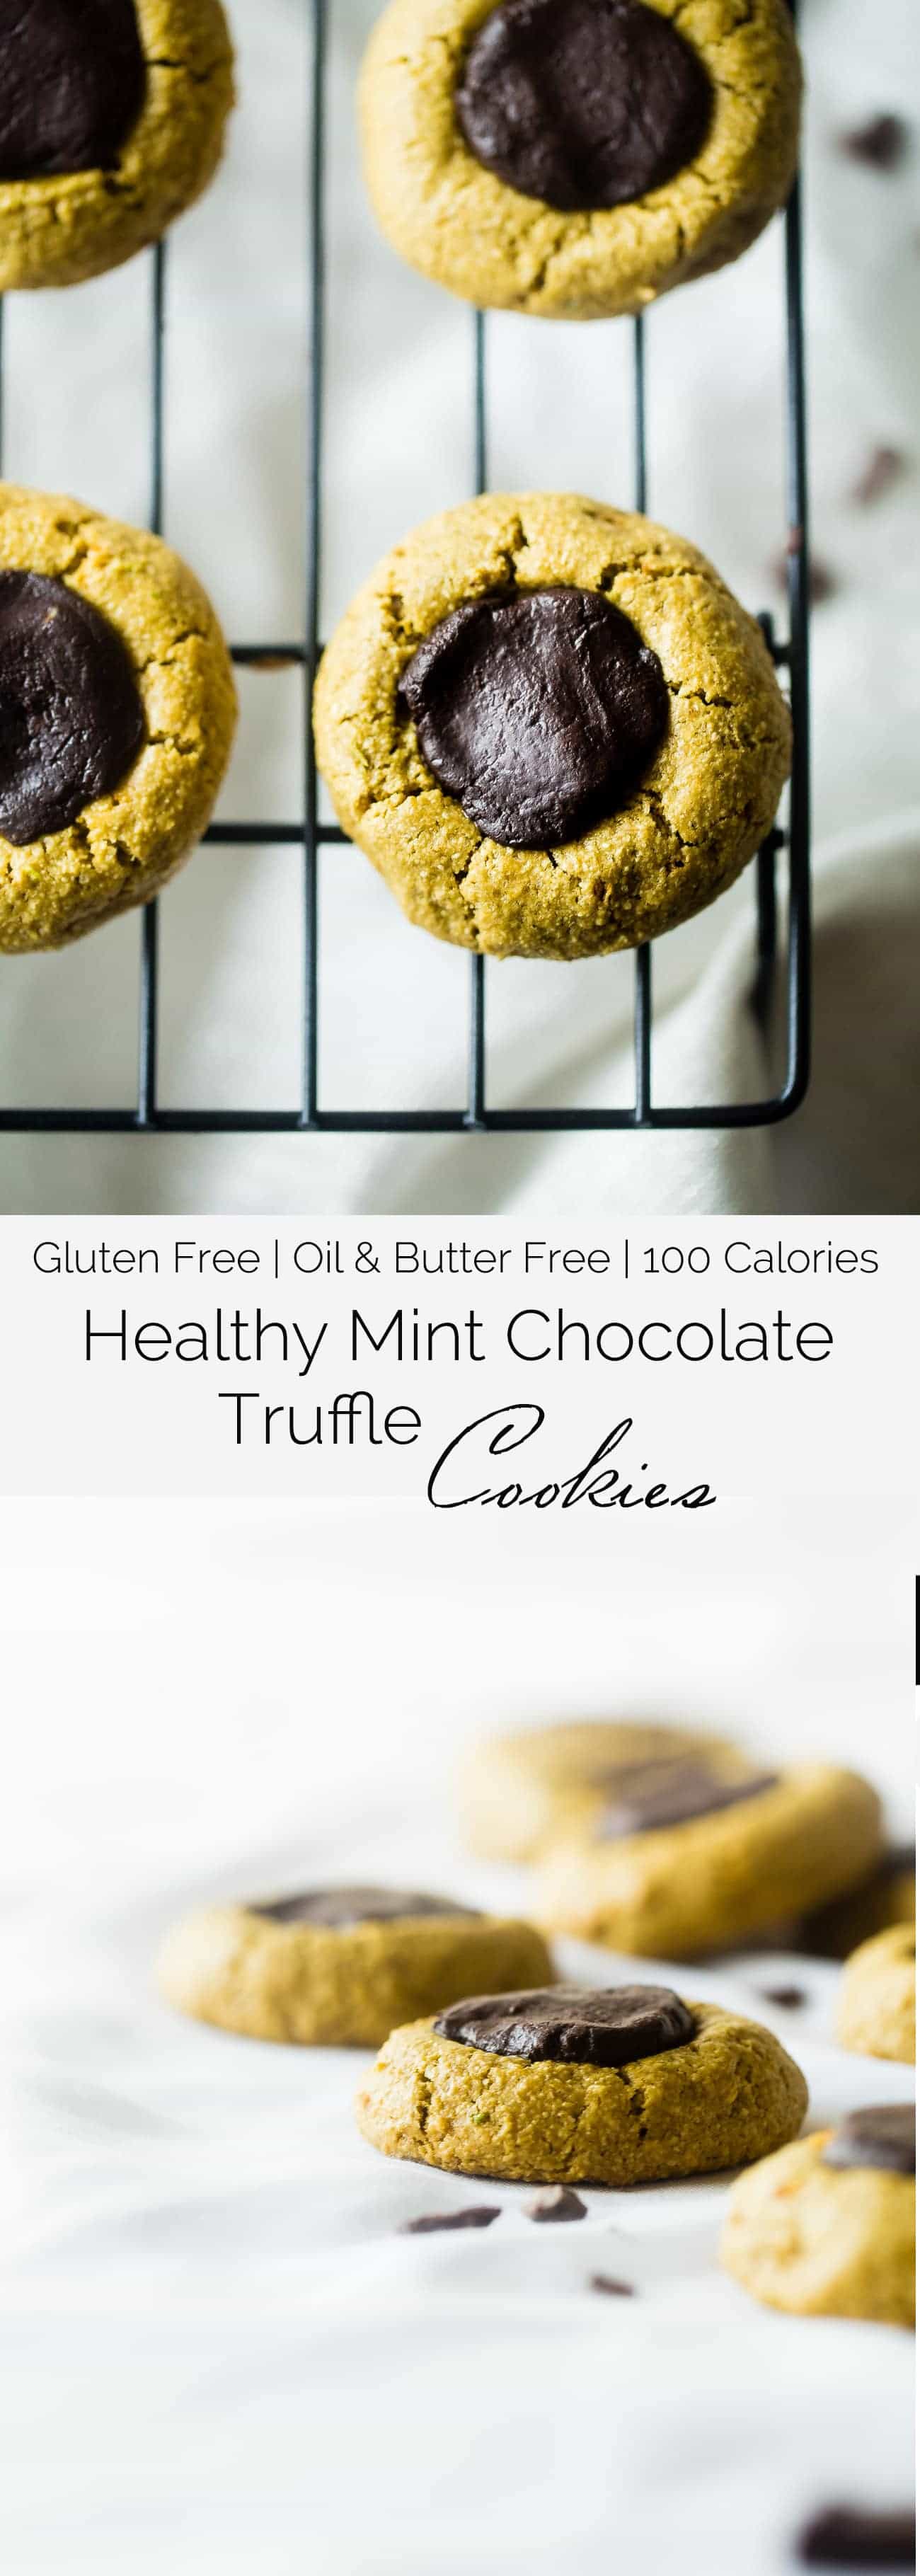 Chocolate Mint Truffle Cookies - These gluten free chocolate mint avocado cookies have a rich truffle center, are so soft and chewy and are only 100 calories! They're a healthy cookie for the holidays that are easy to make! | Foodfaithfitness.com | @FoodFaithFit